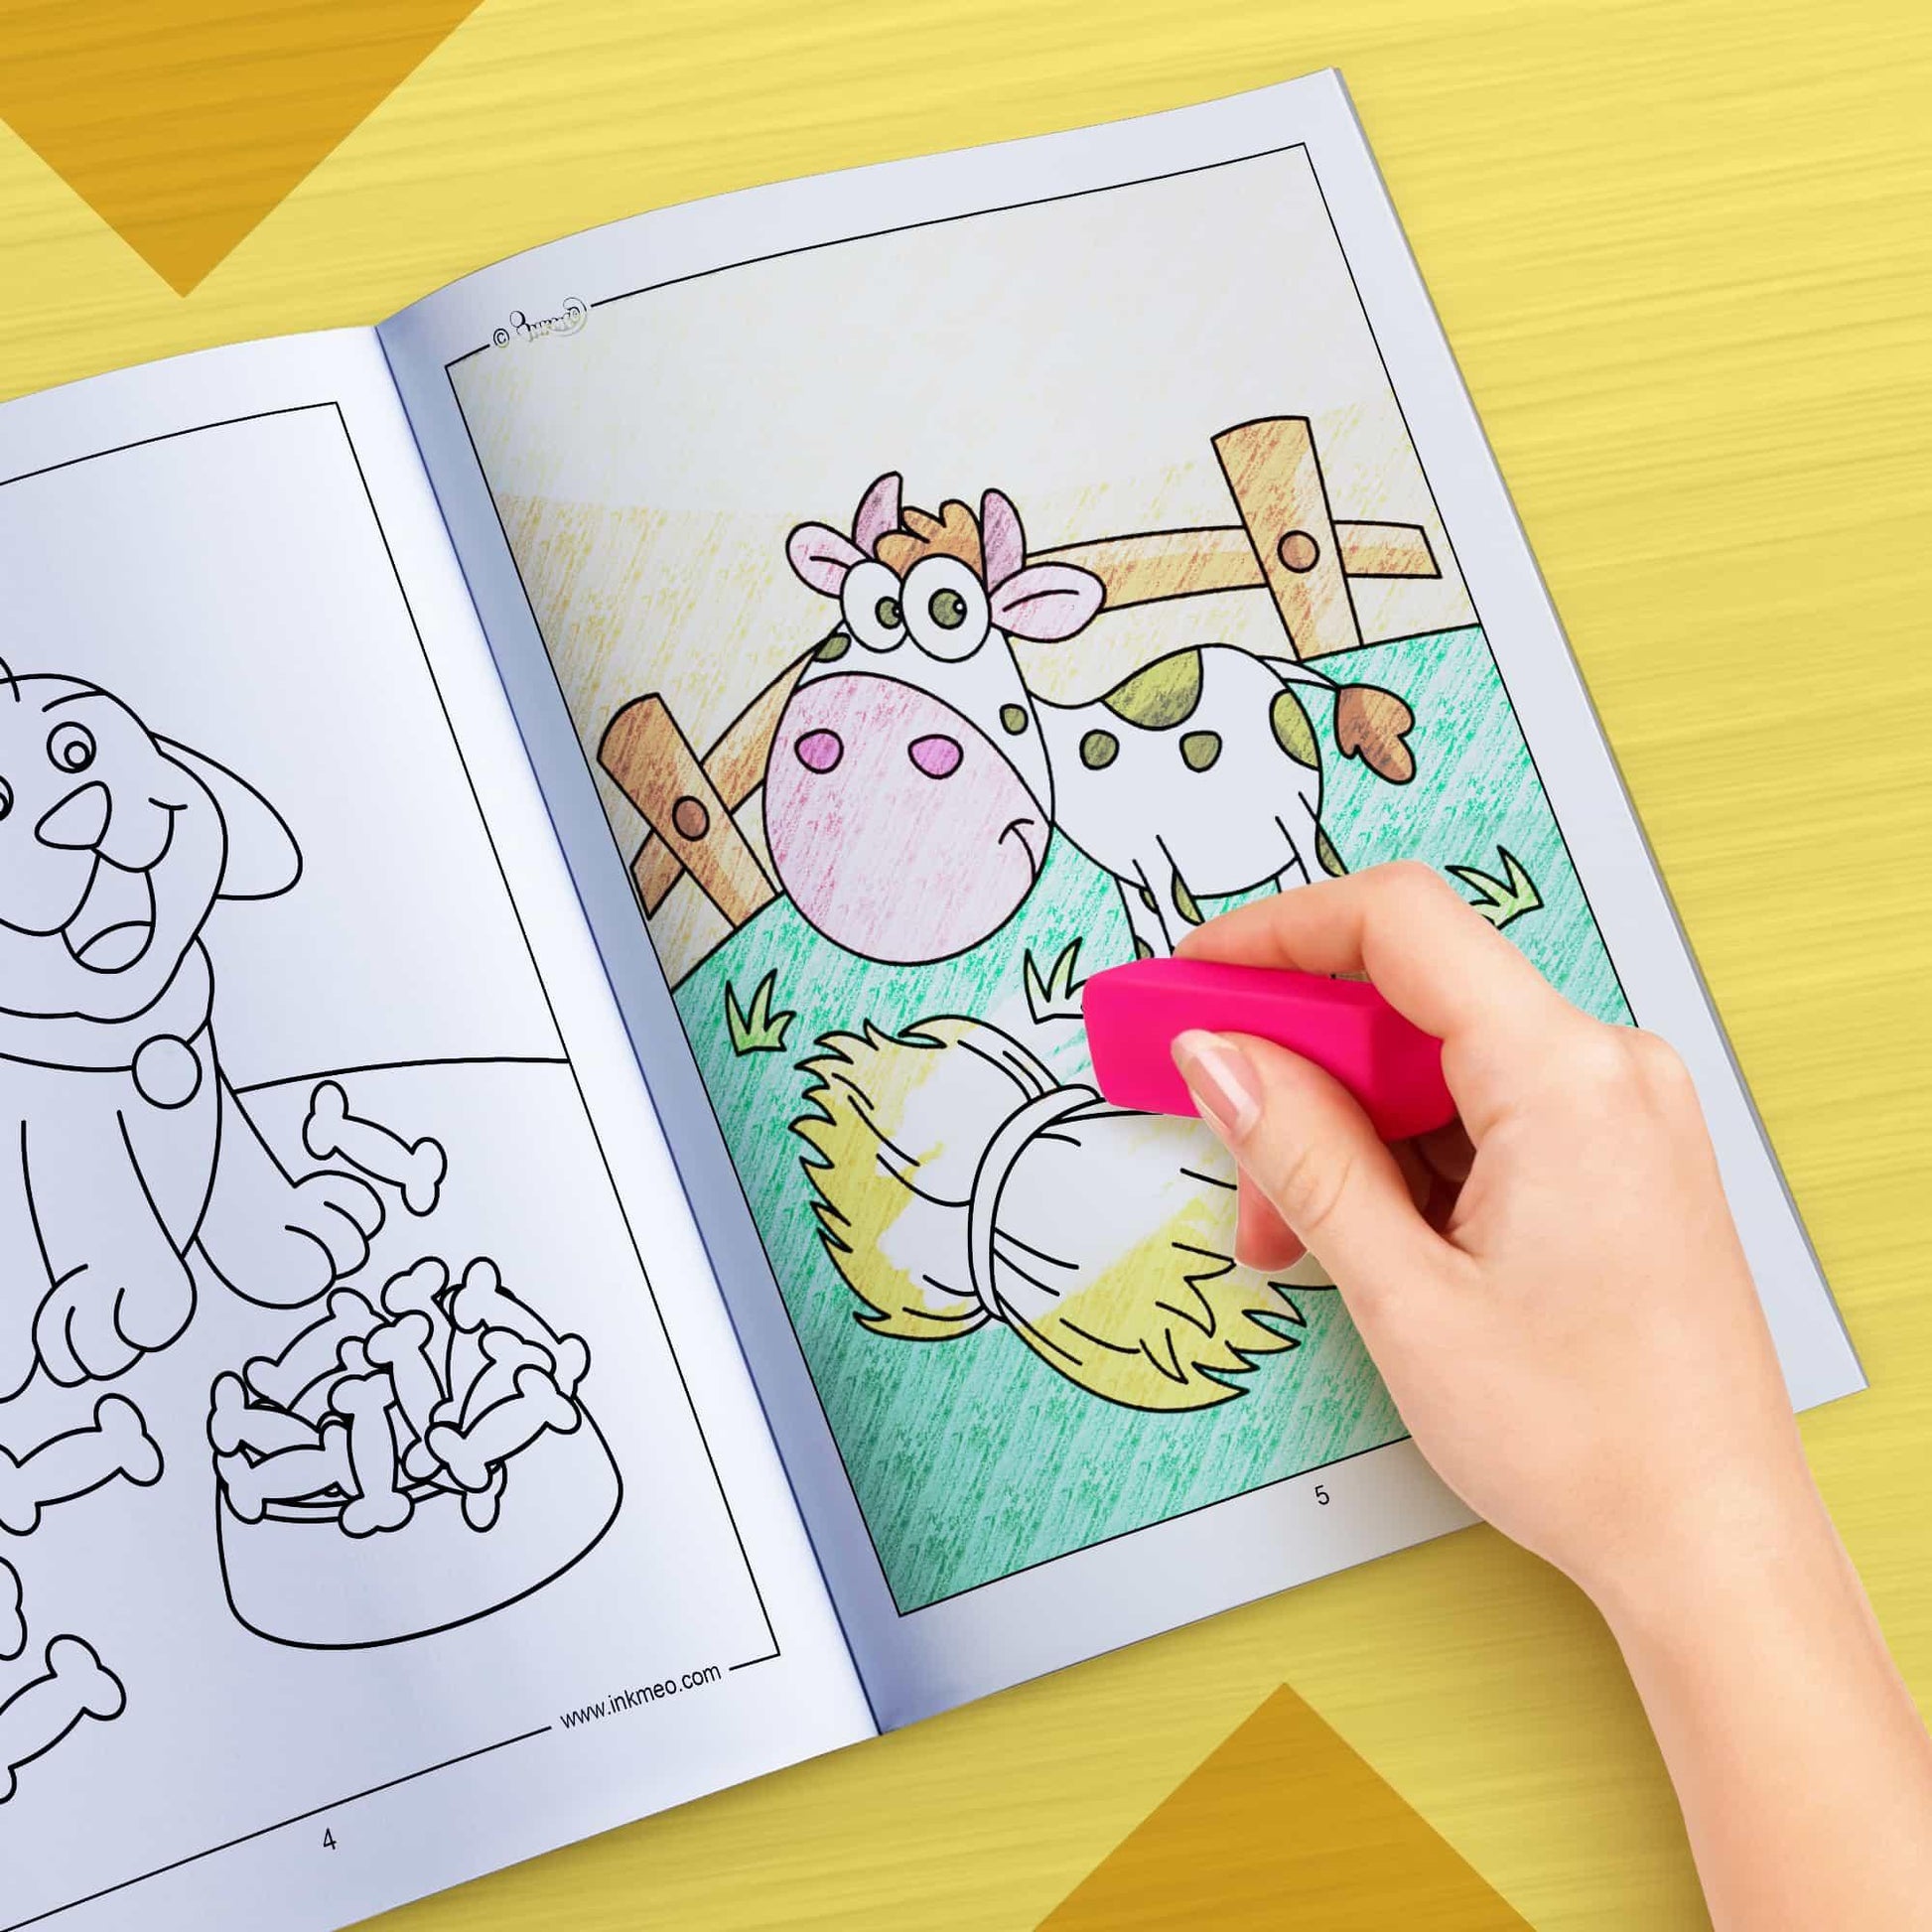 The image depicts a hand using an eraser to erase crayon marks in a colouring book.